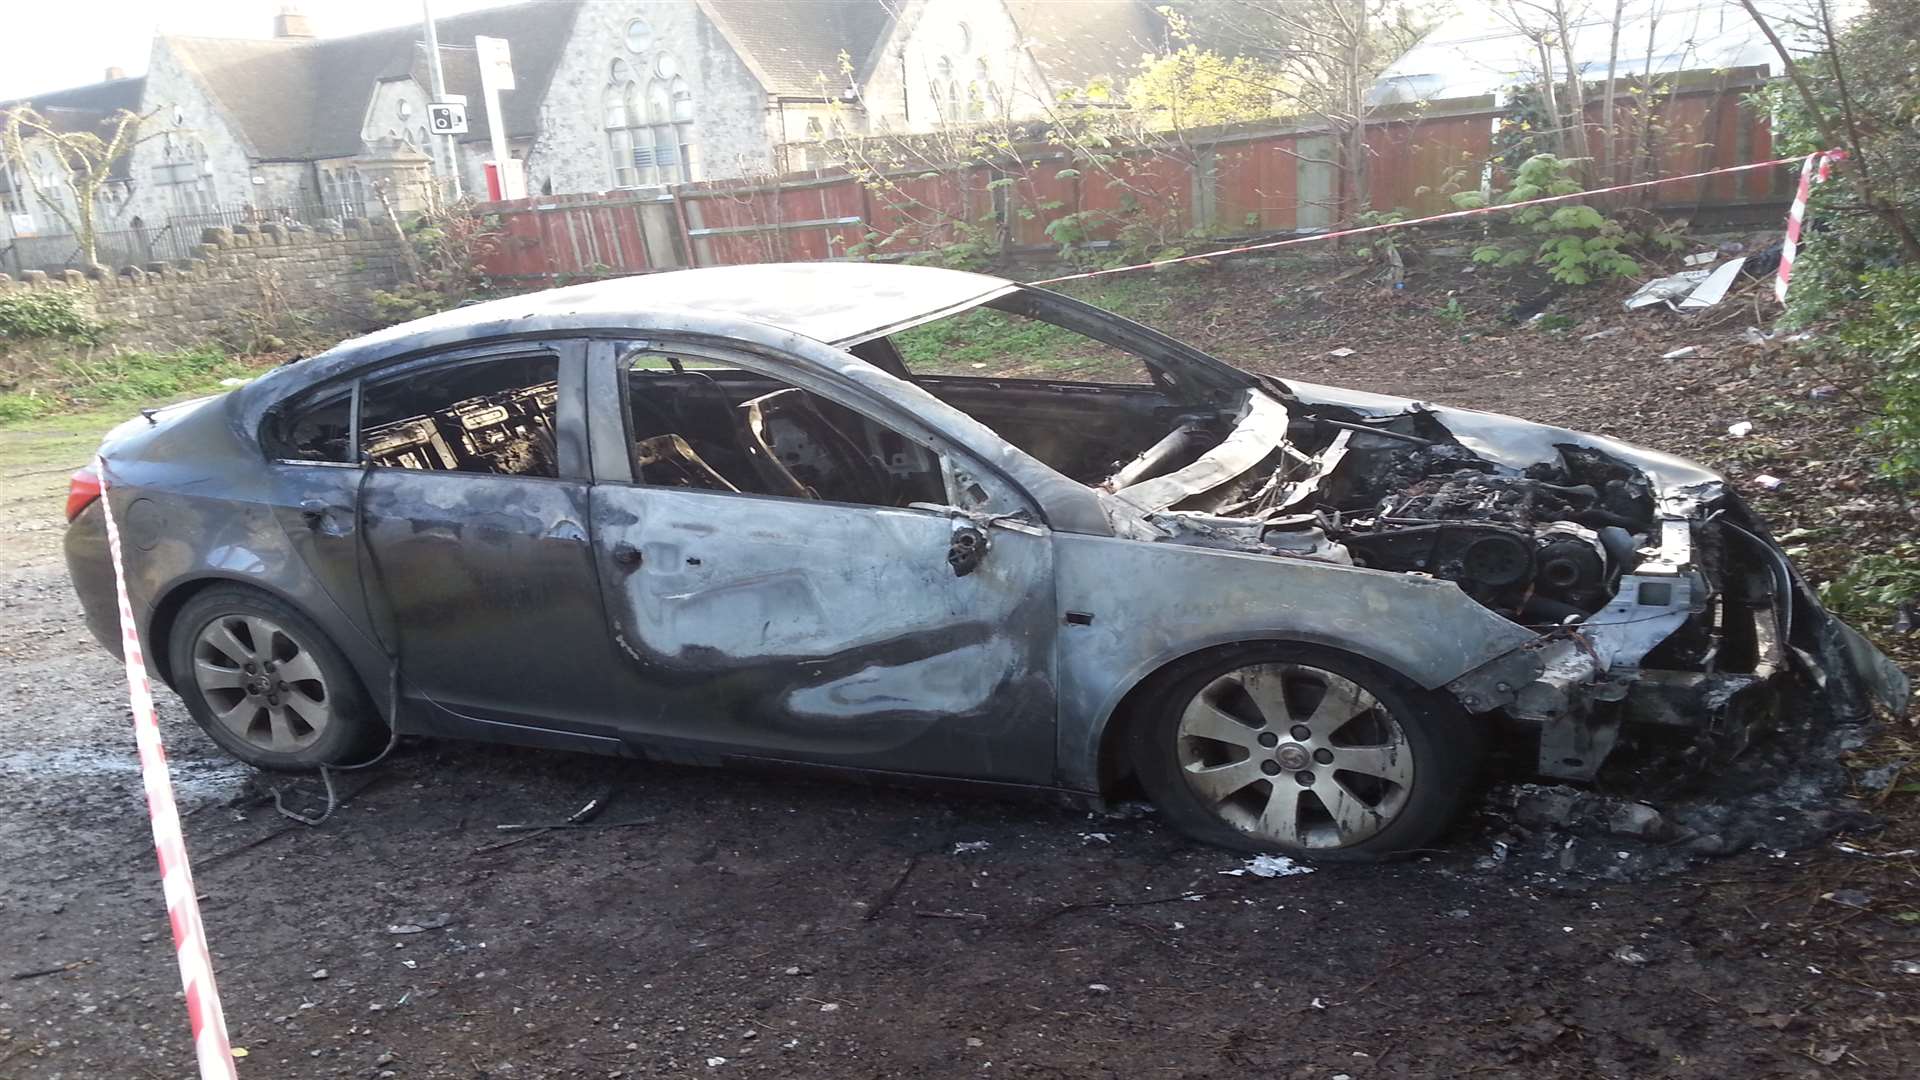 The car was burnt out